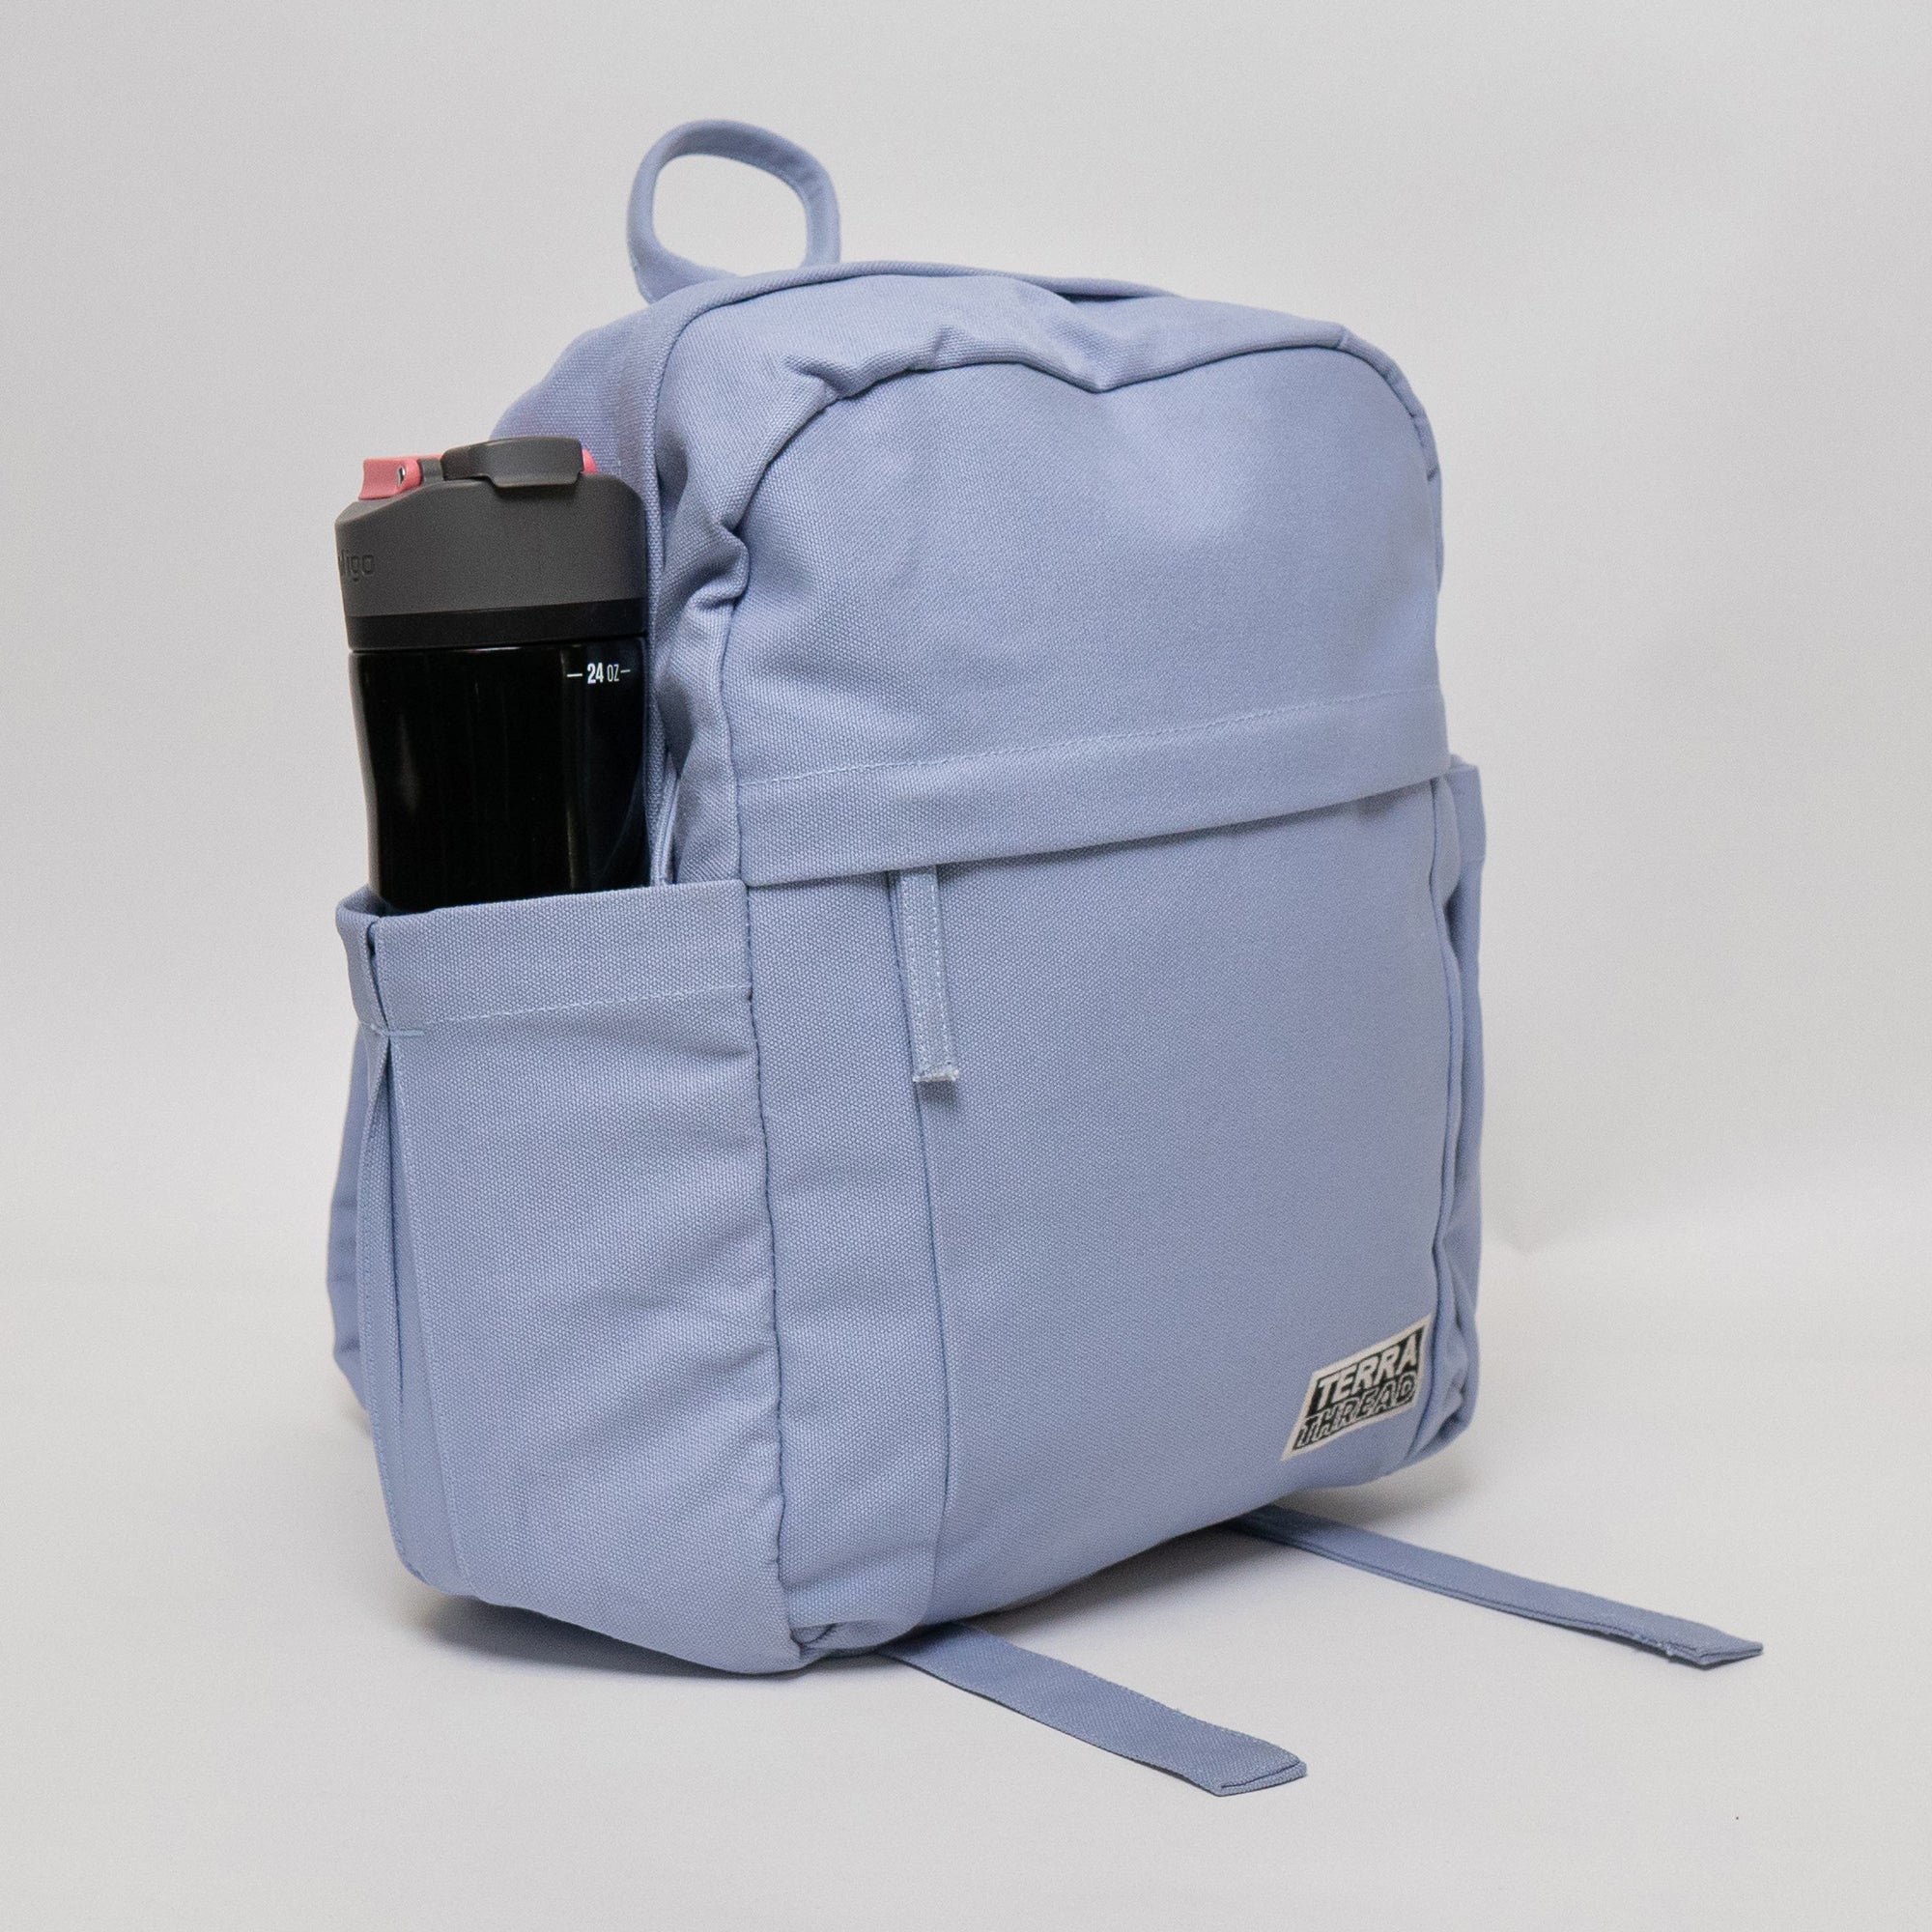 A light blue Terra Thread backpack with a waterbottle in the side pocket.